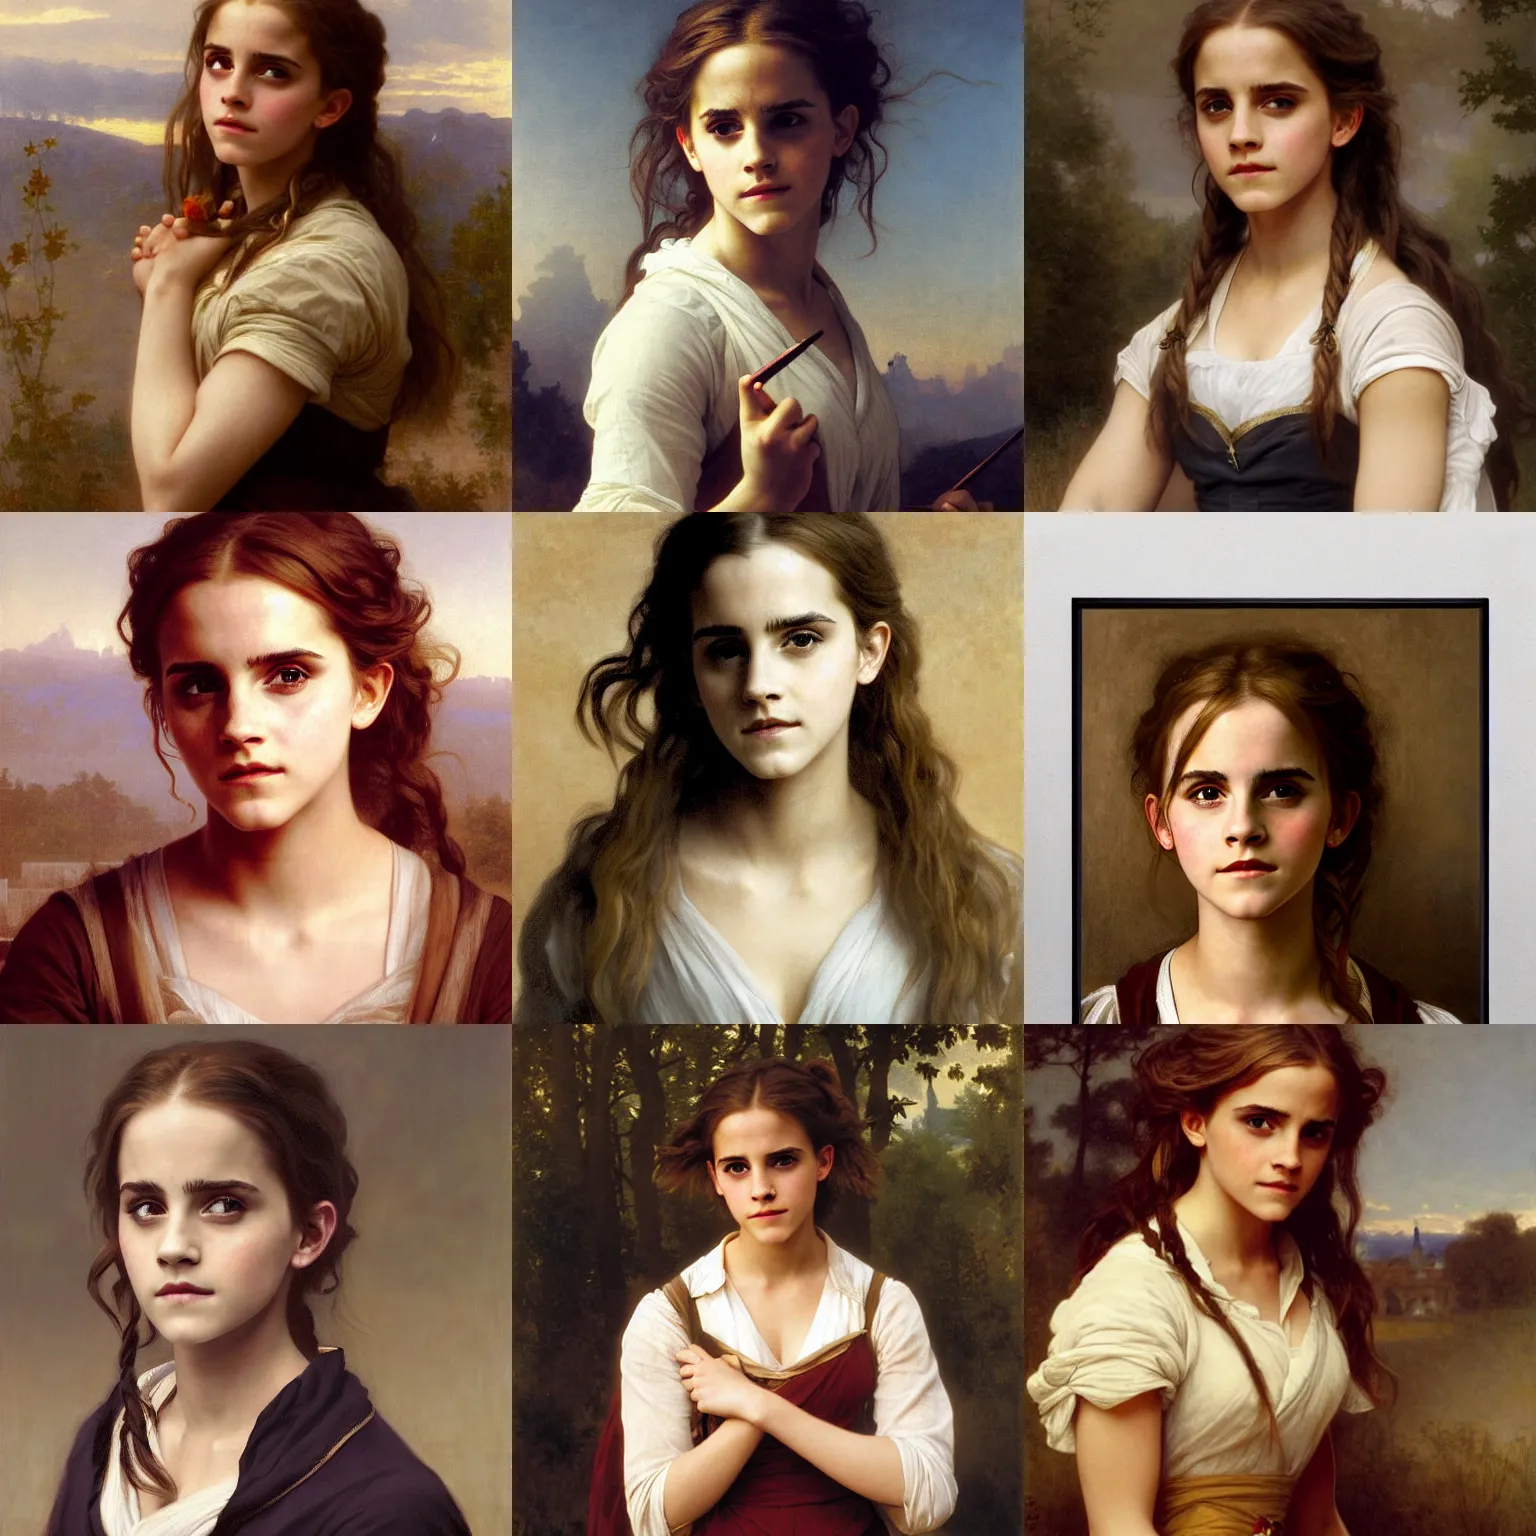 Prompt: Painting of Emma Watson as Hermione Granger, surprised expression on her face, her hand is on her waist, her other hand is on her face. Art by william adolphe bouguereau. During golden hour. Extremely detailed. Beautiful. 4K. Award winning.